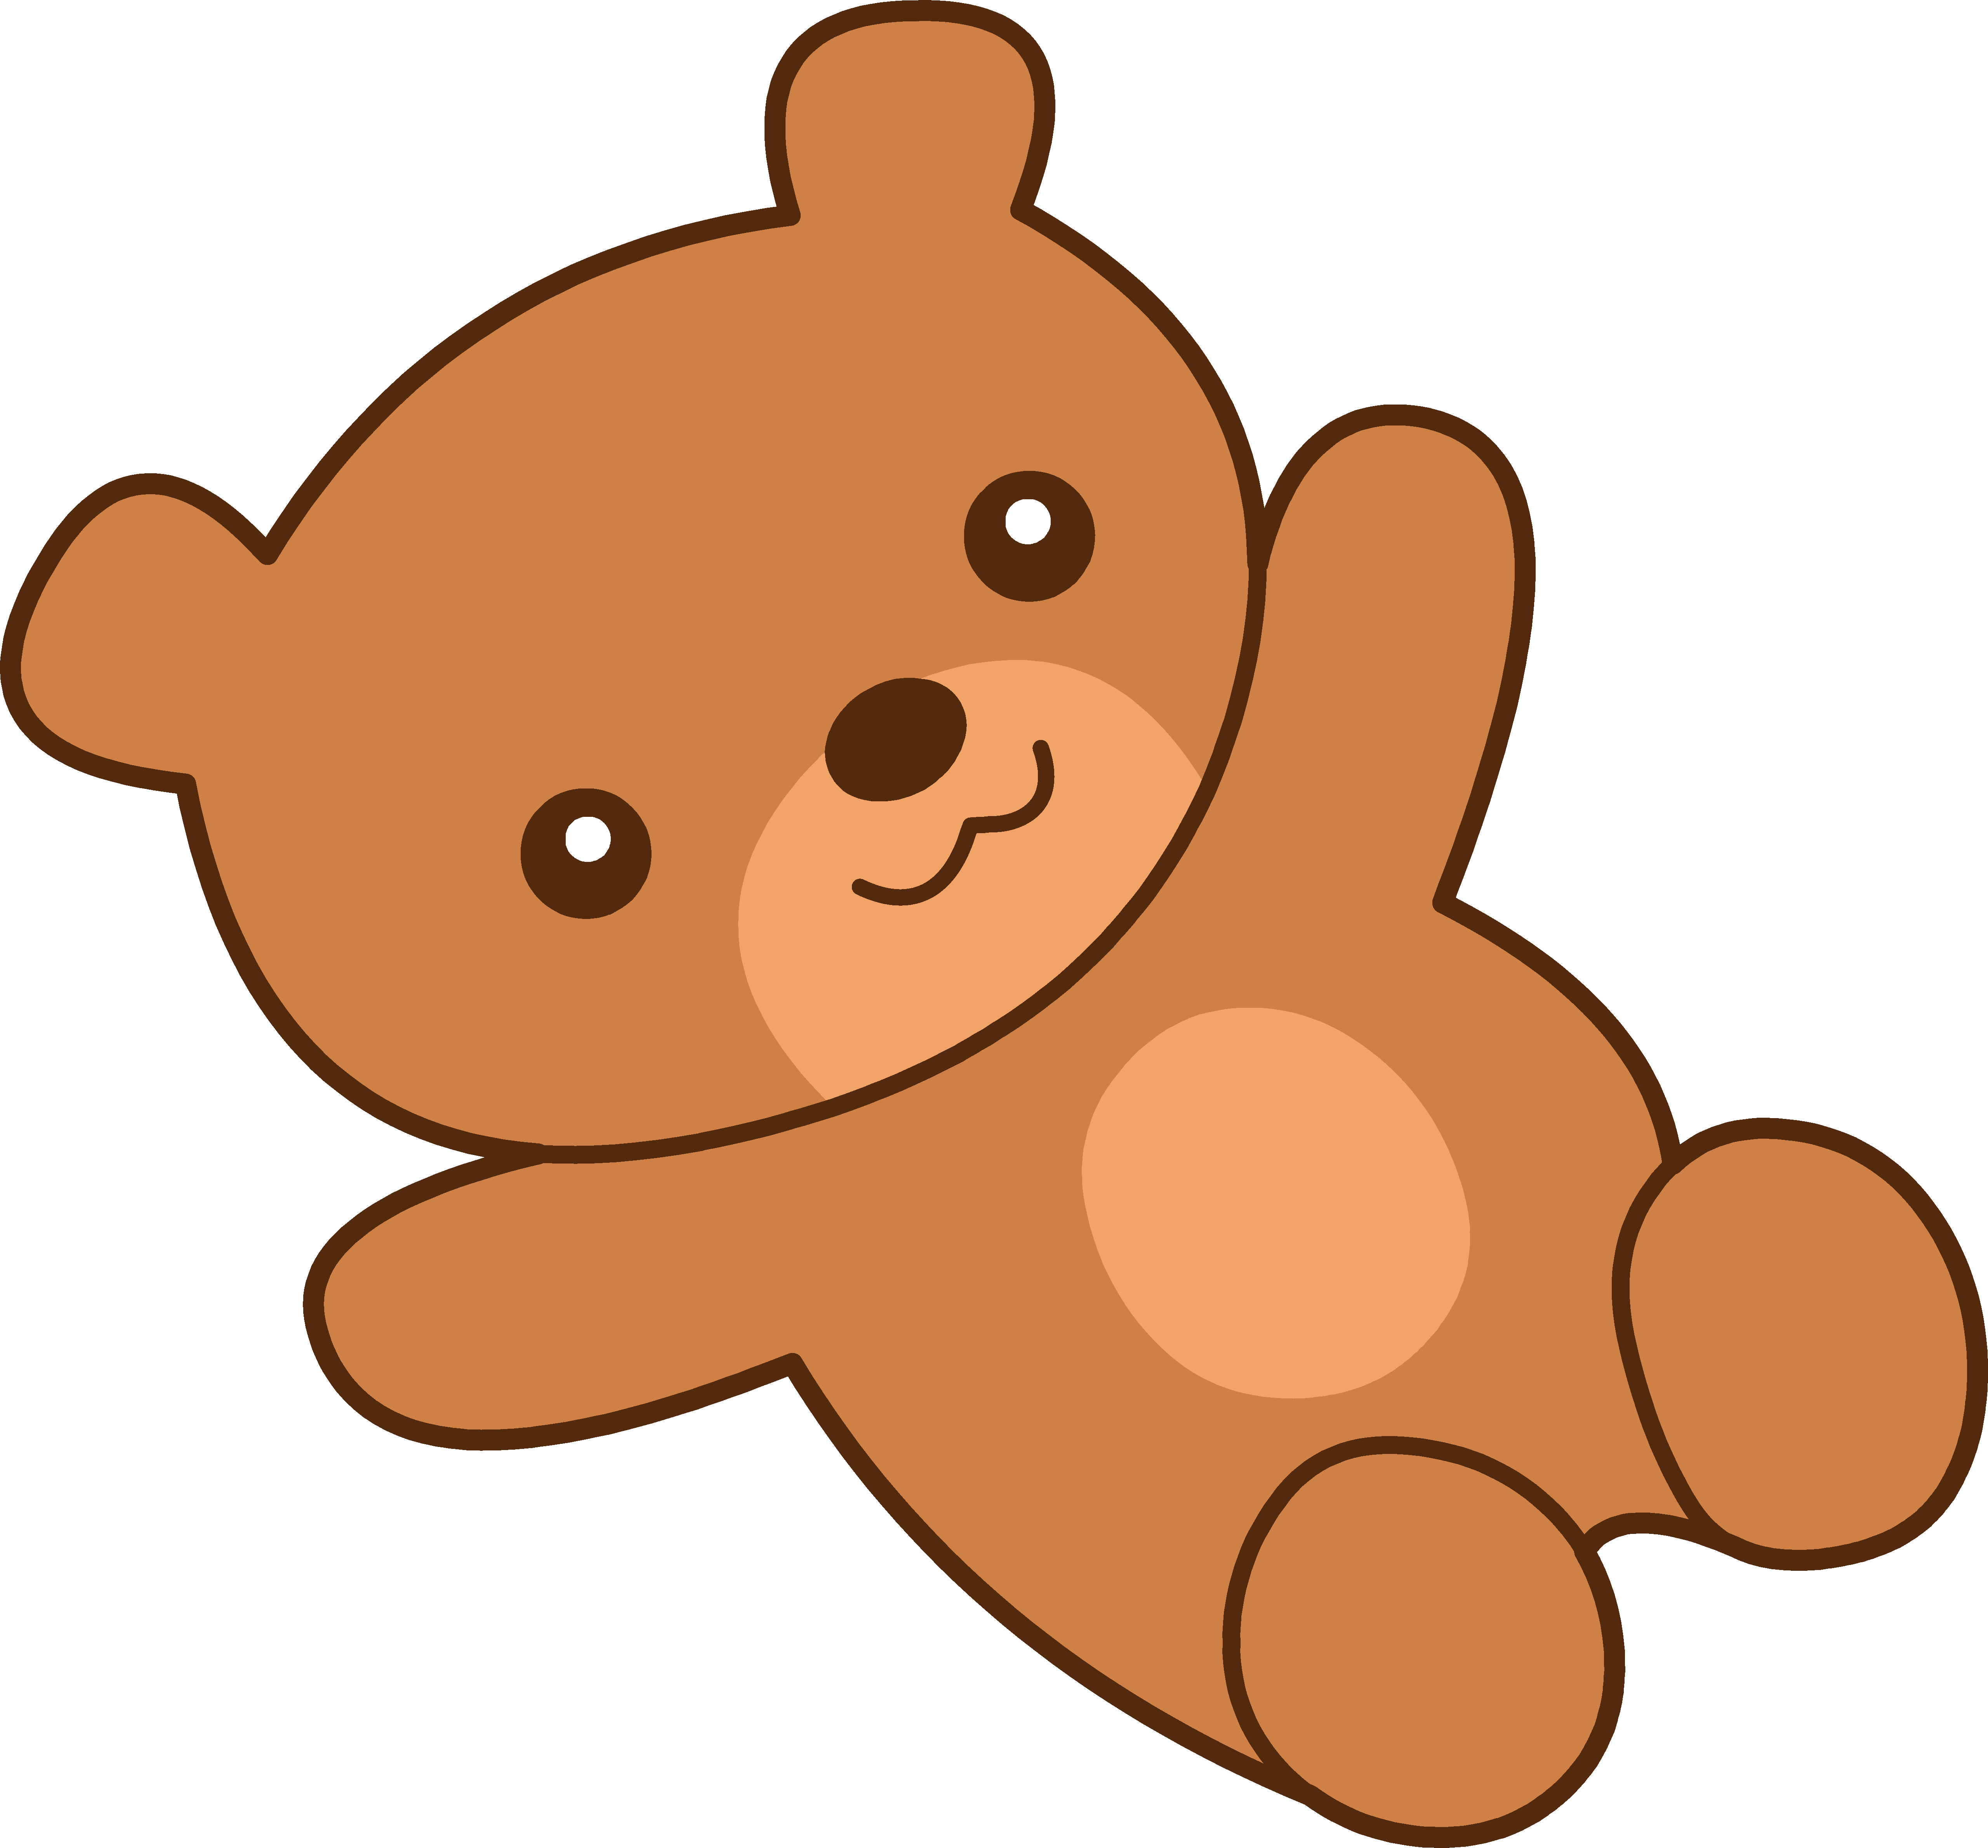 Teddy bear clipart free clipart images 2